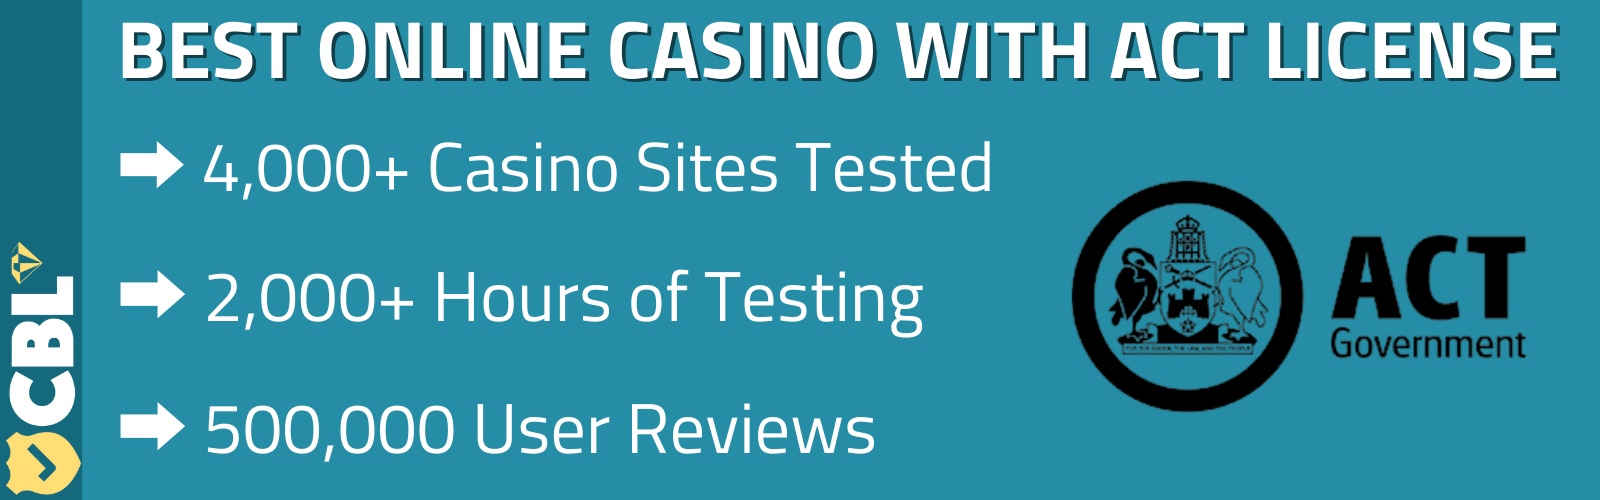 BEST ONLINE CASINO WITH ACT LICENSE